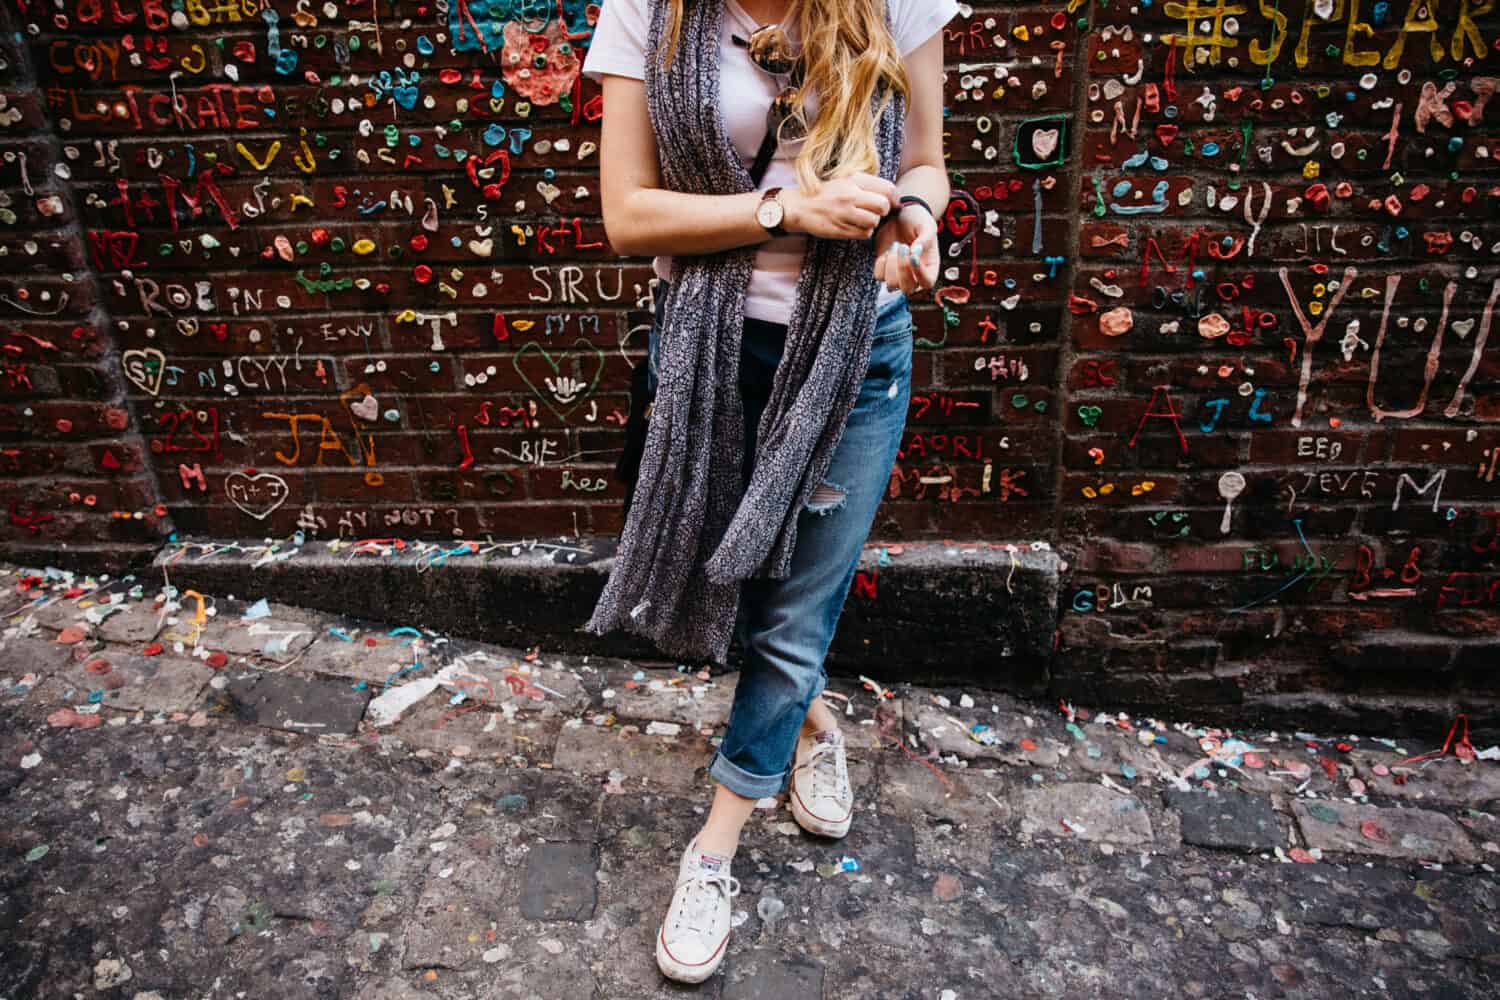 Free Things To Do In Seattle - Visit The Gum Wall